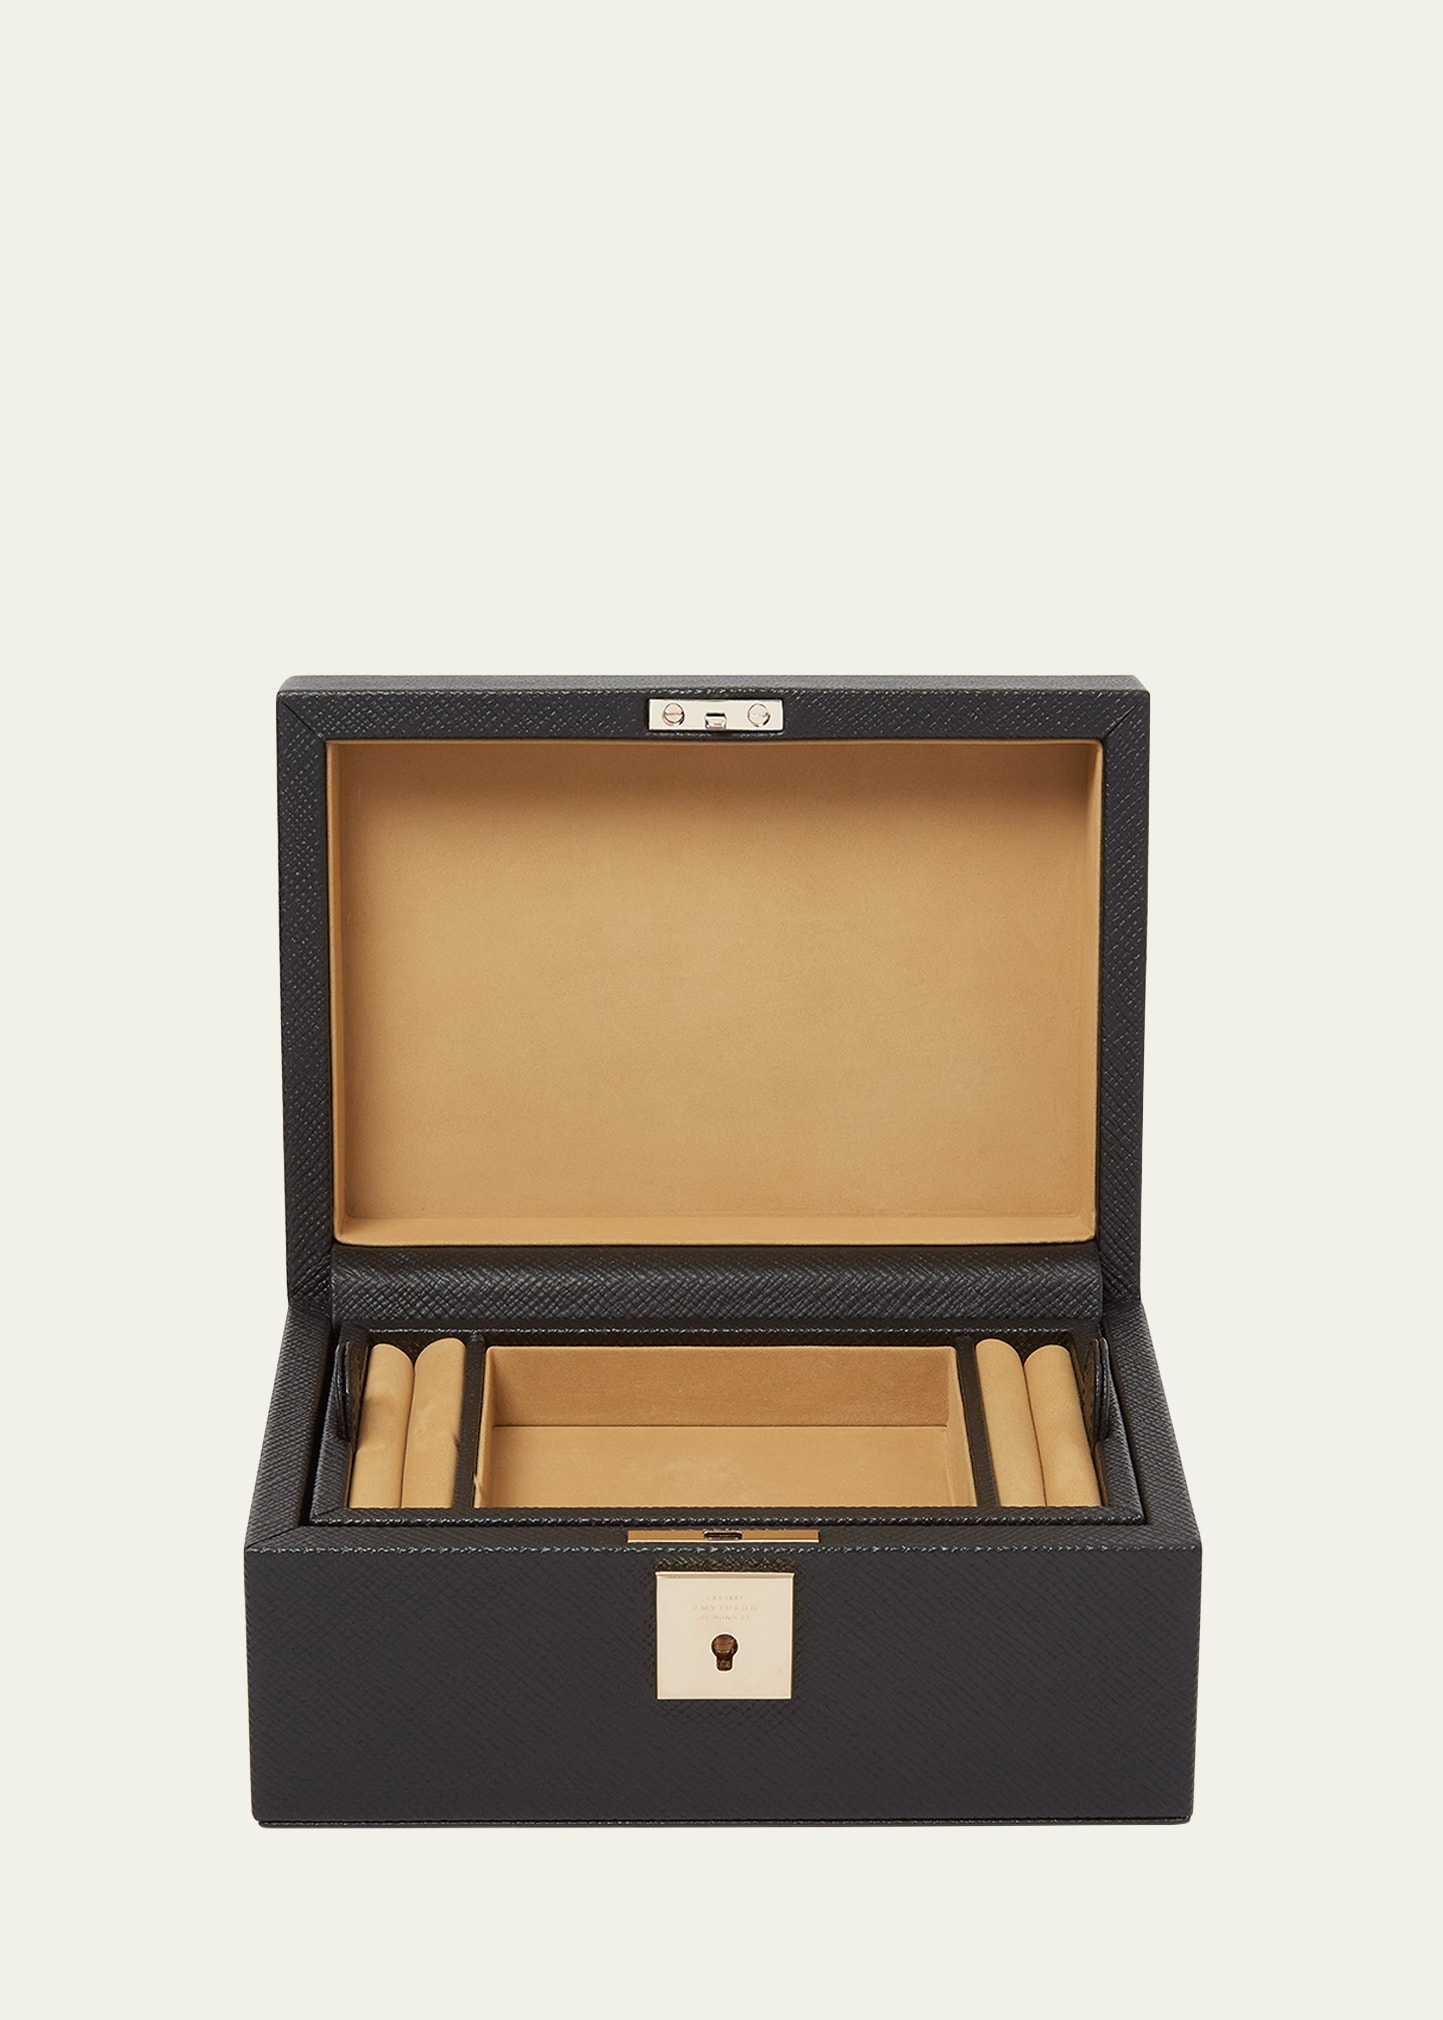 Panama Classic Leather Jewelry Box with Travel Tray